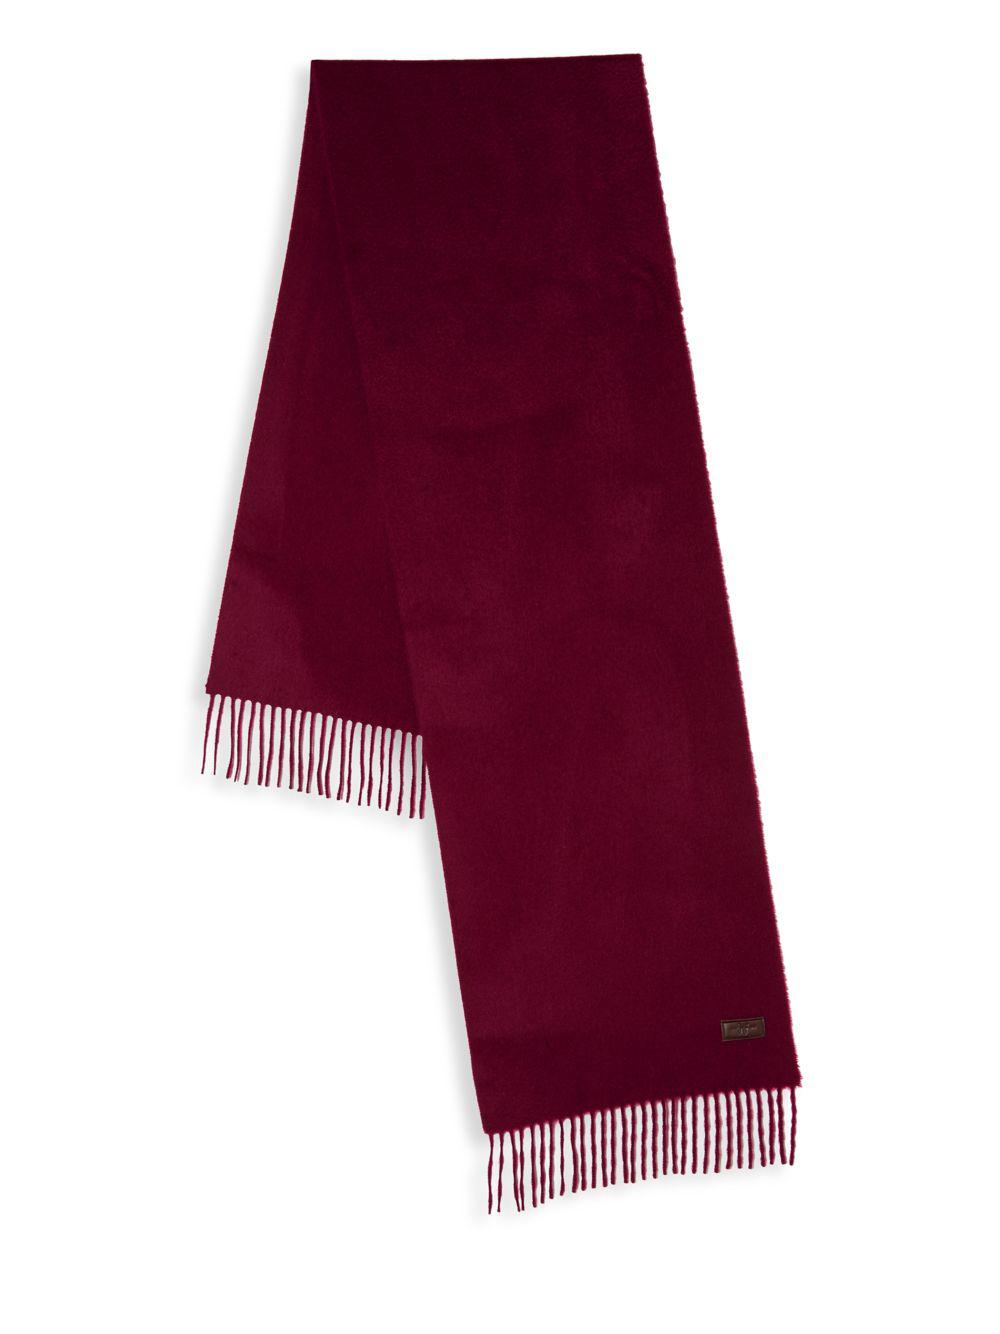 Lyst - Hickey Freeman Fringed Cashmere Scarf in Red